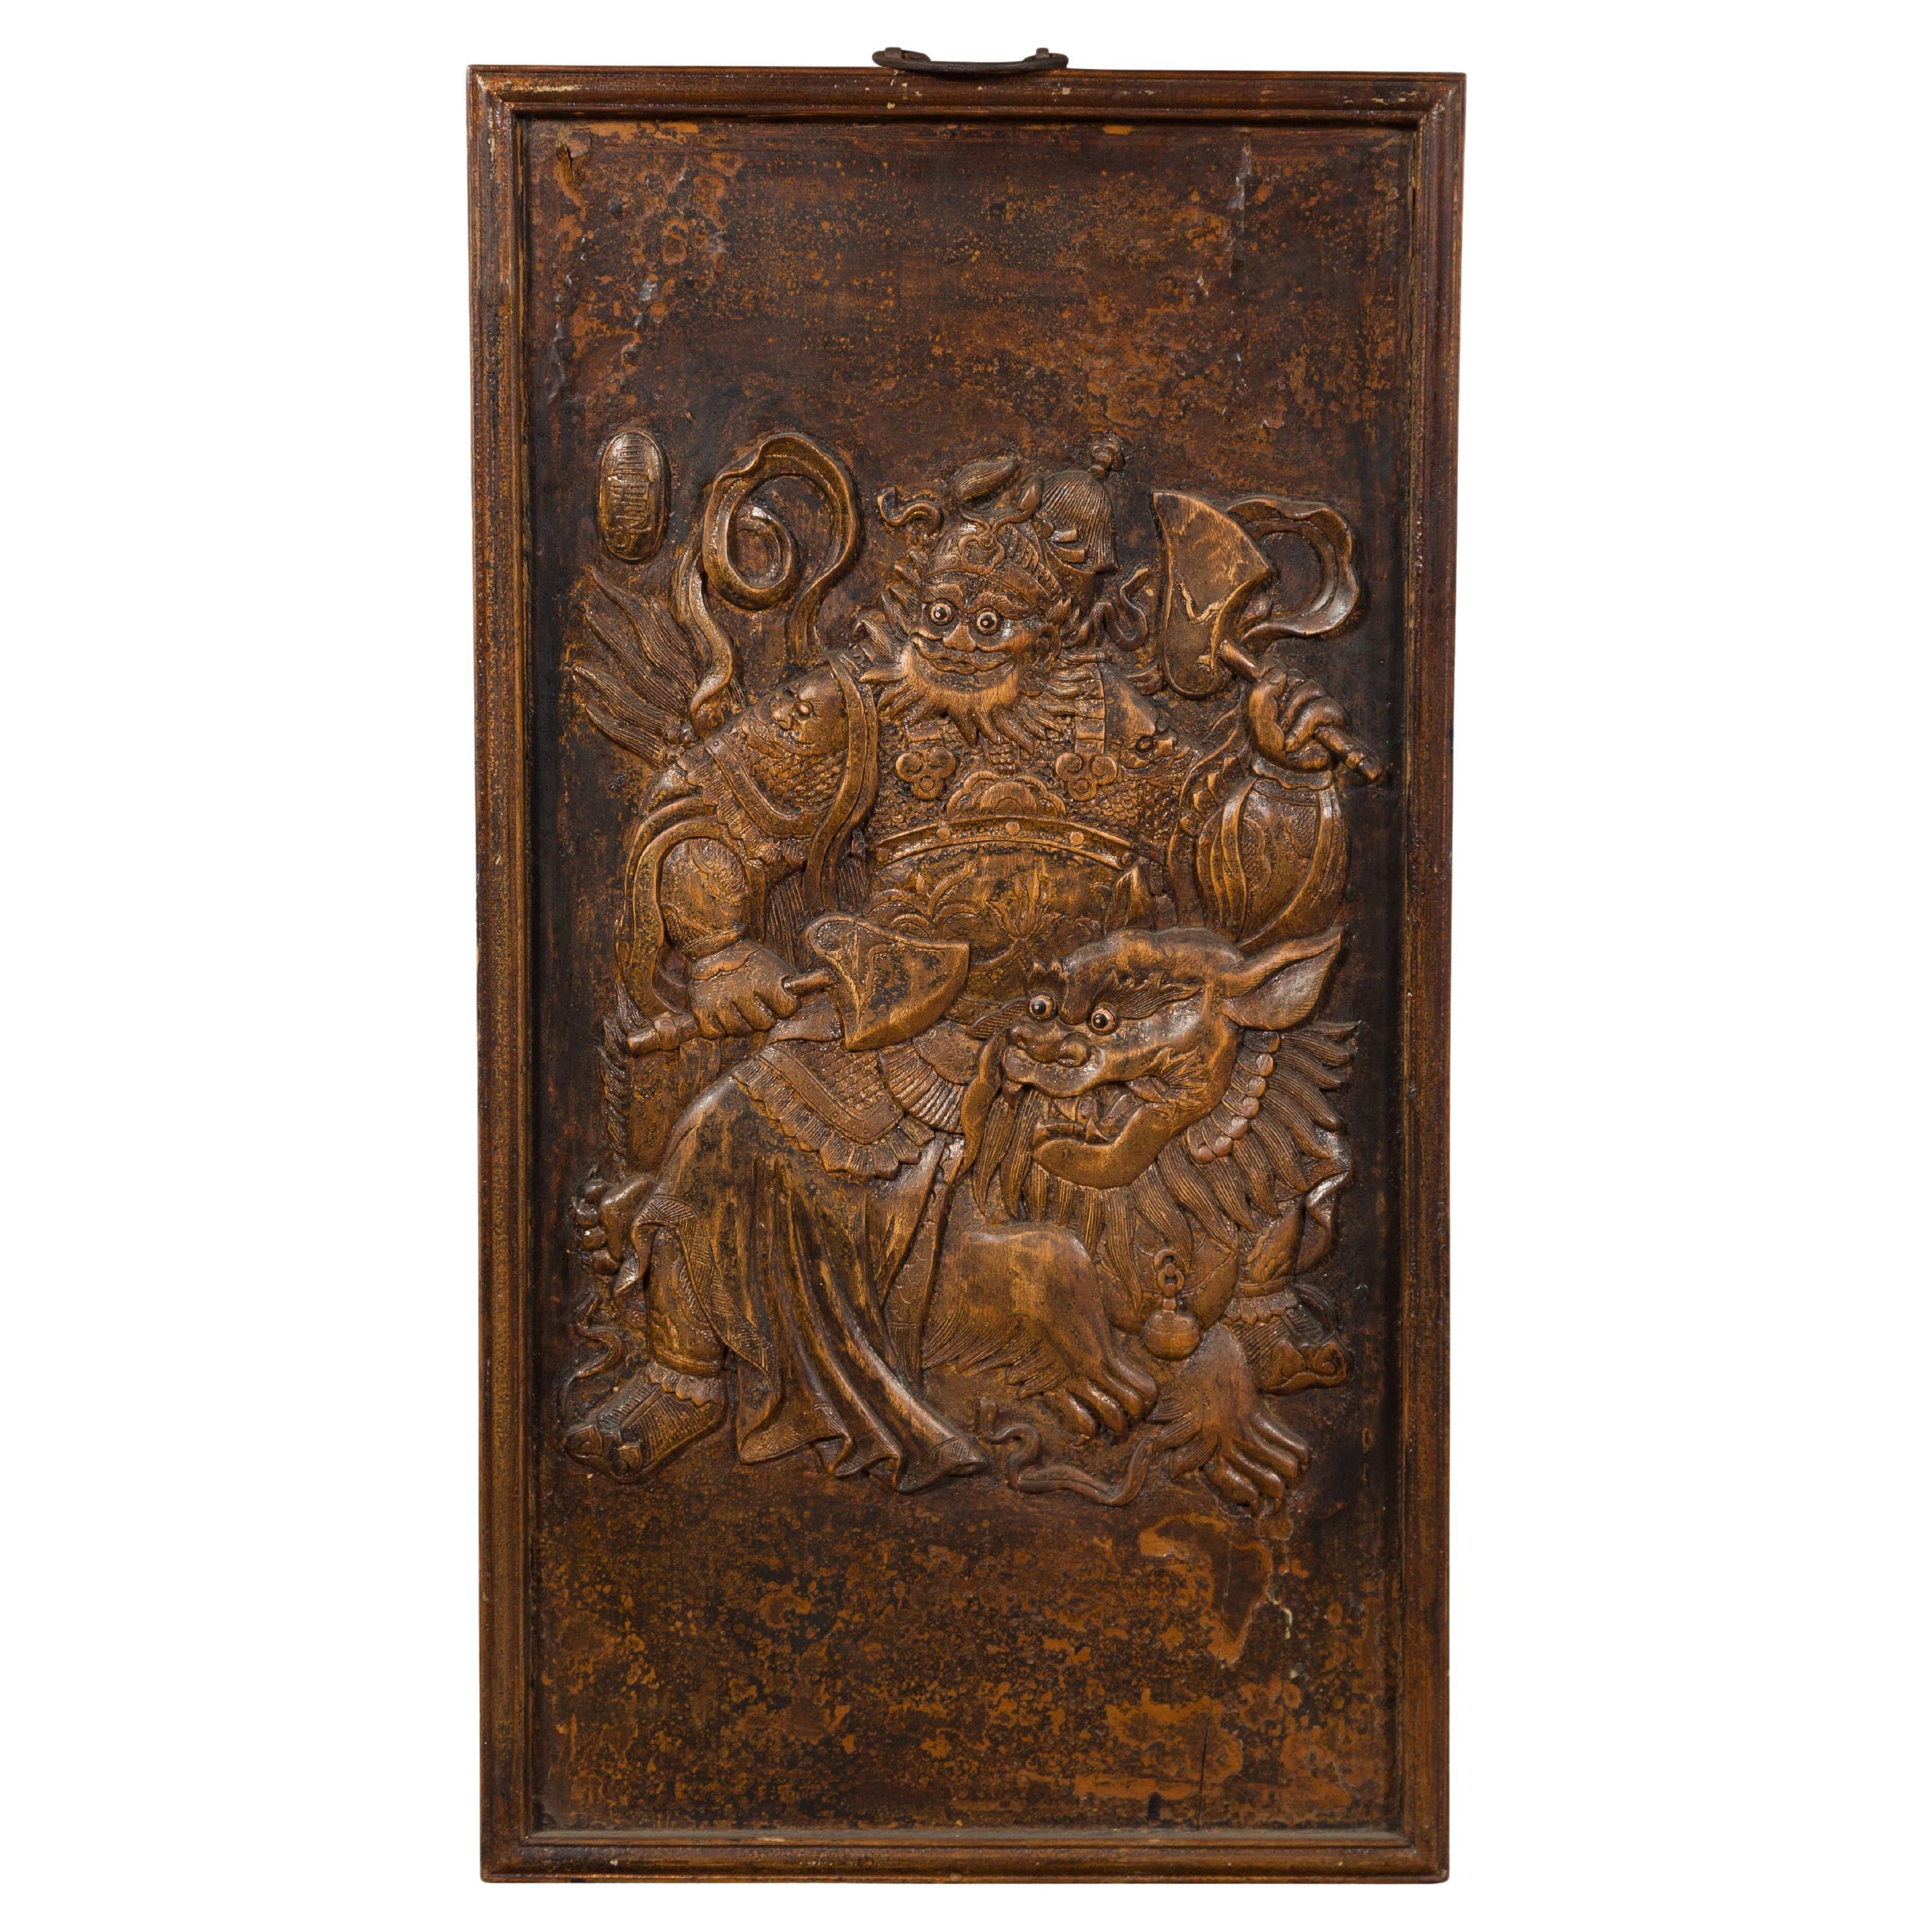 Chinese Zhejiang Vintage Low-Relief Wall Plaque Depicting a Celestial Guardian For Sale